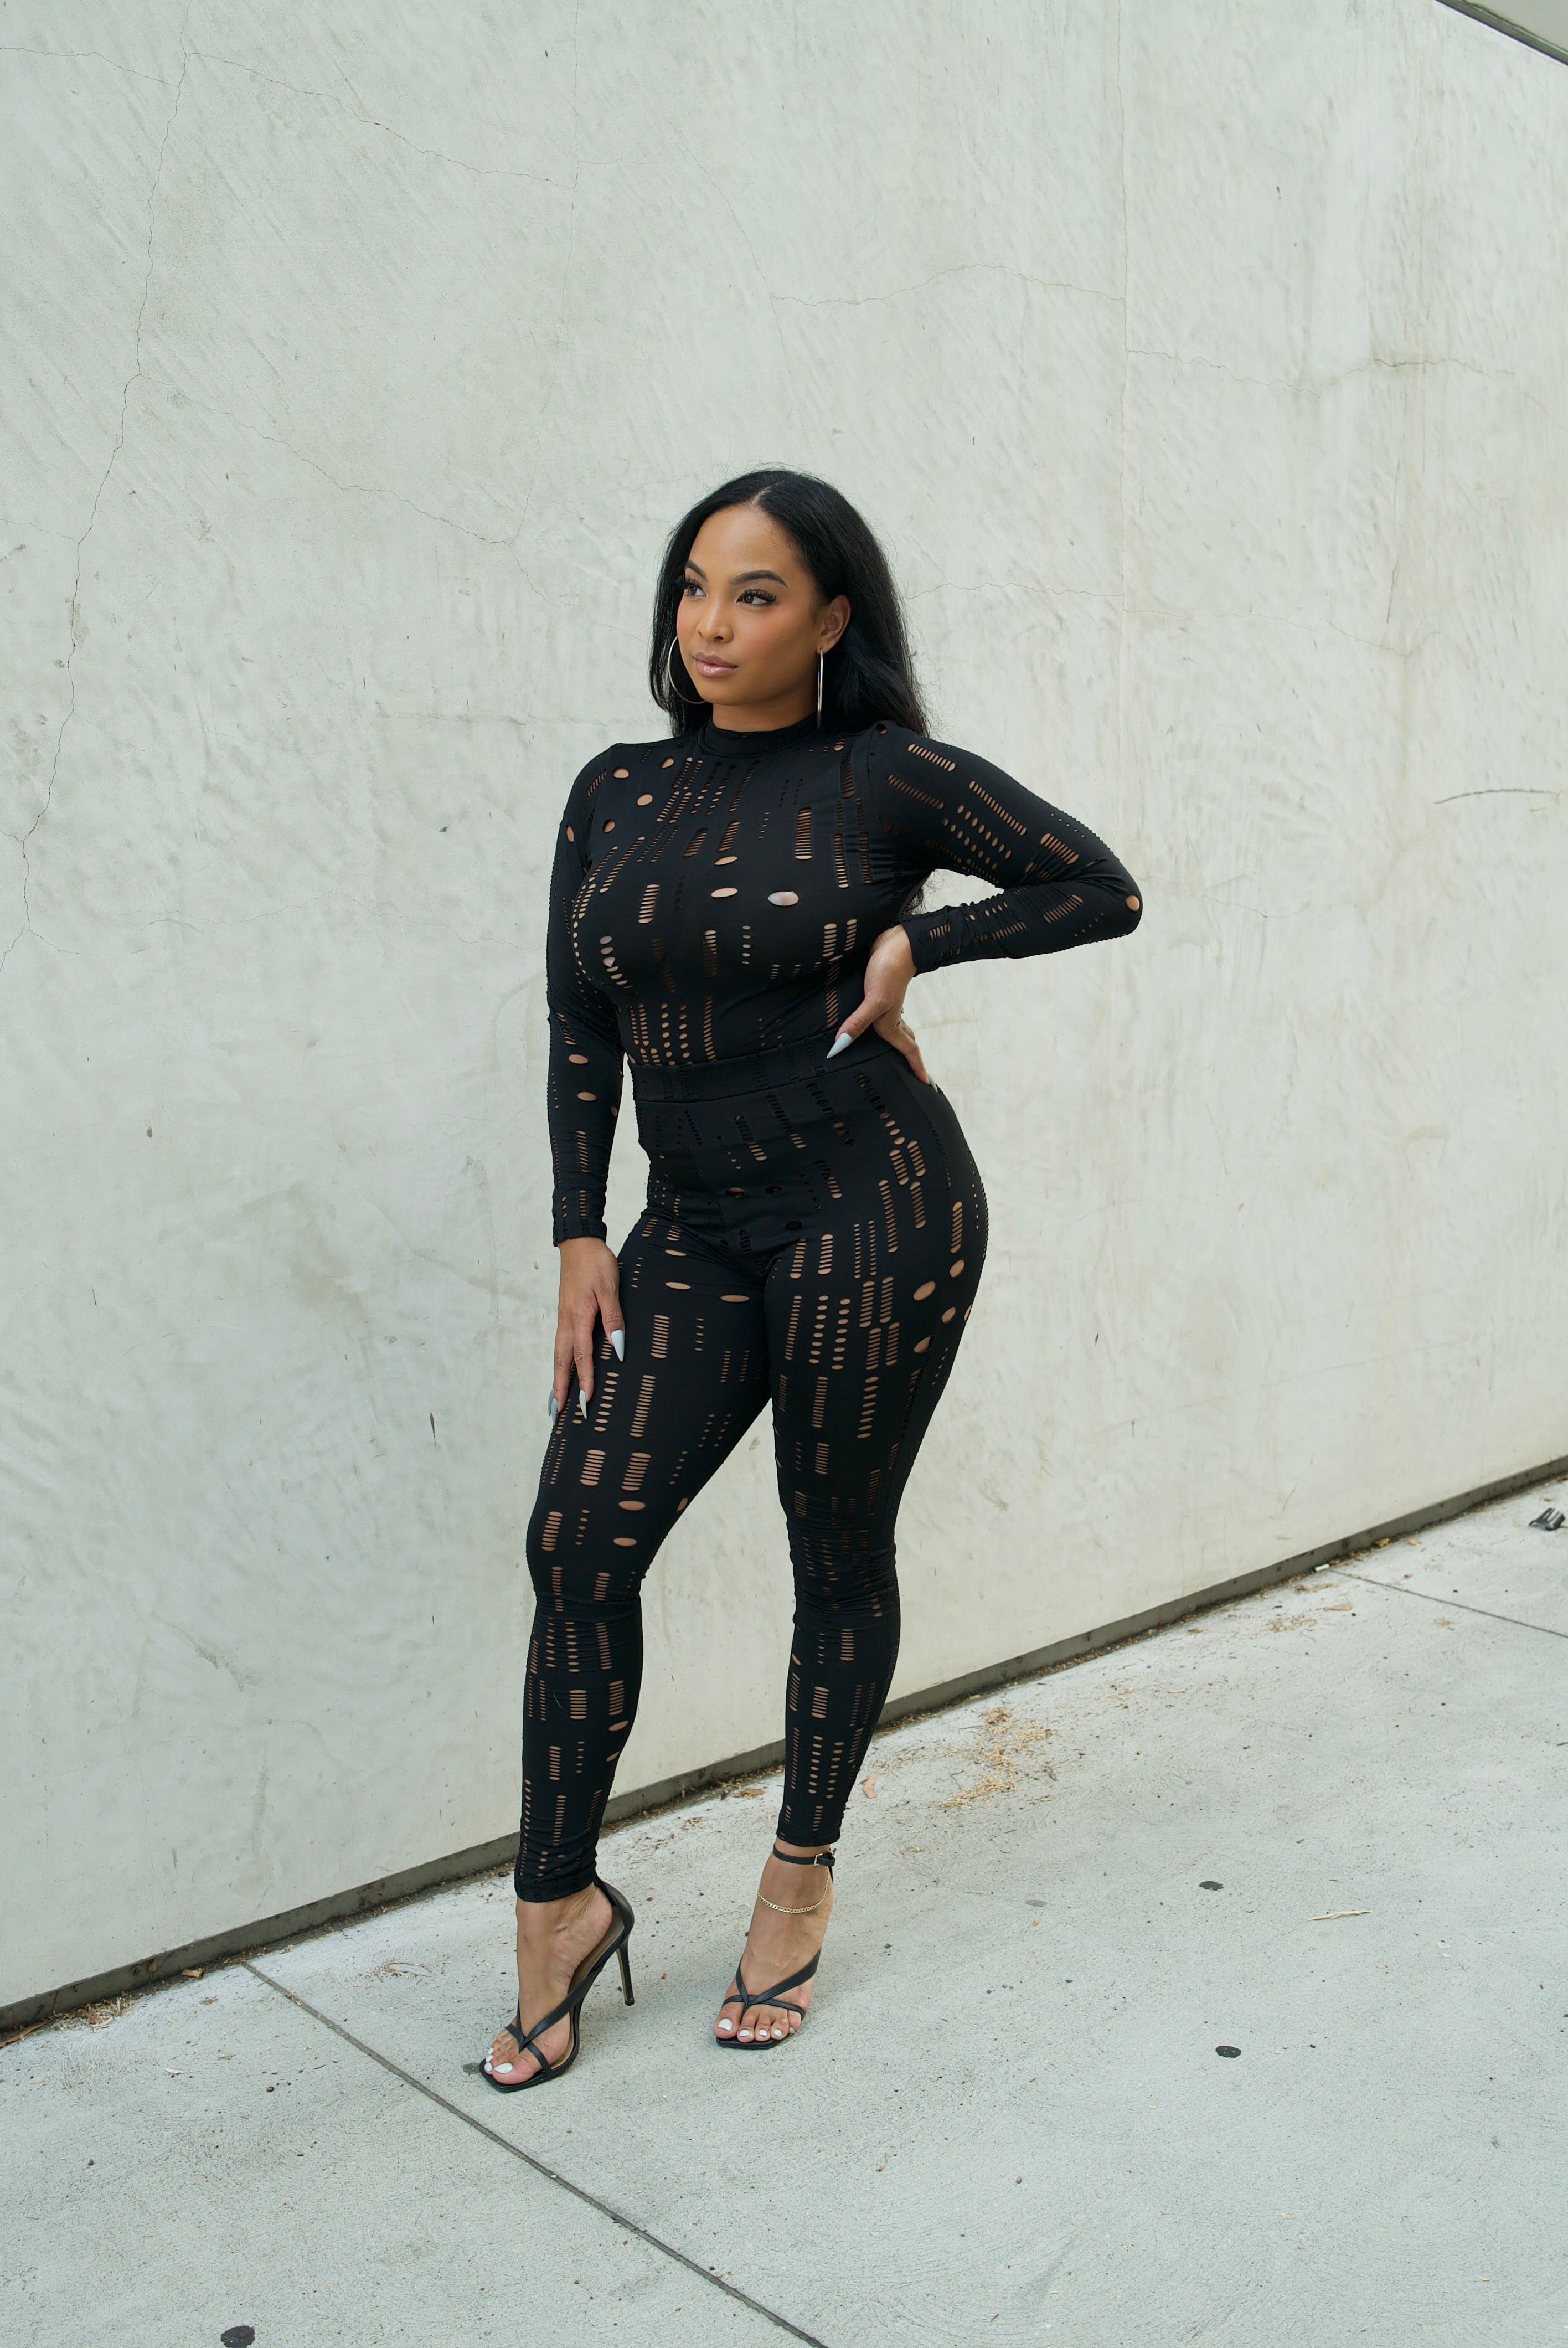 Lizzo wears cut-out leggings from new shapewear line to excitement of fans:  'I can't wait to order' | The Independent